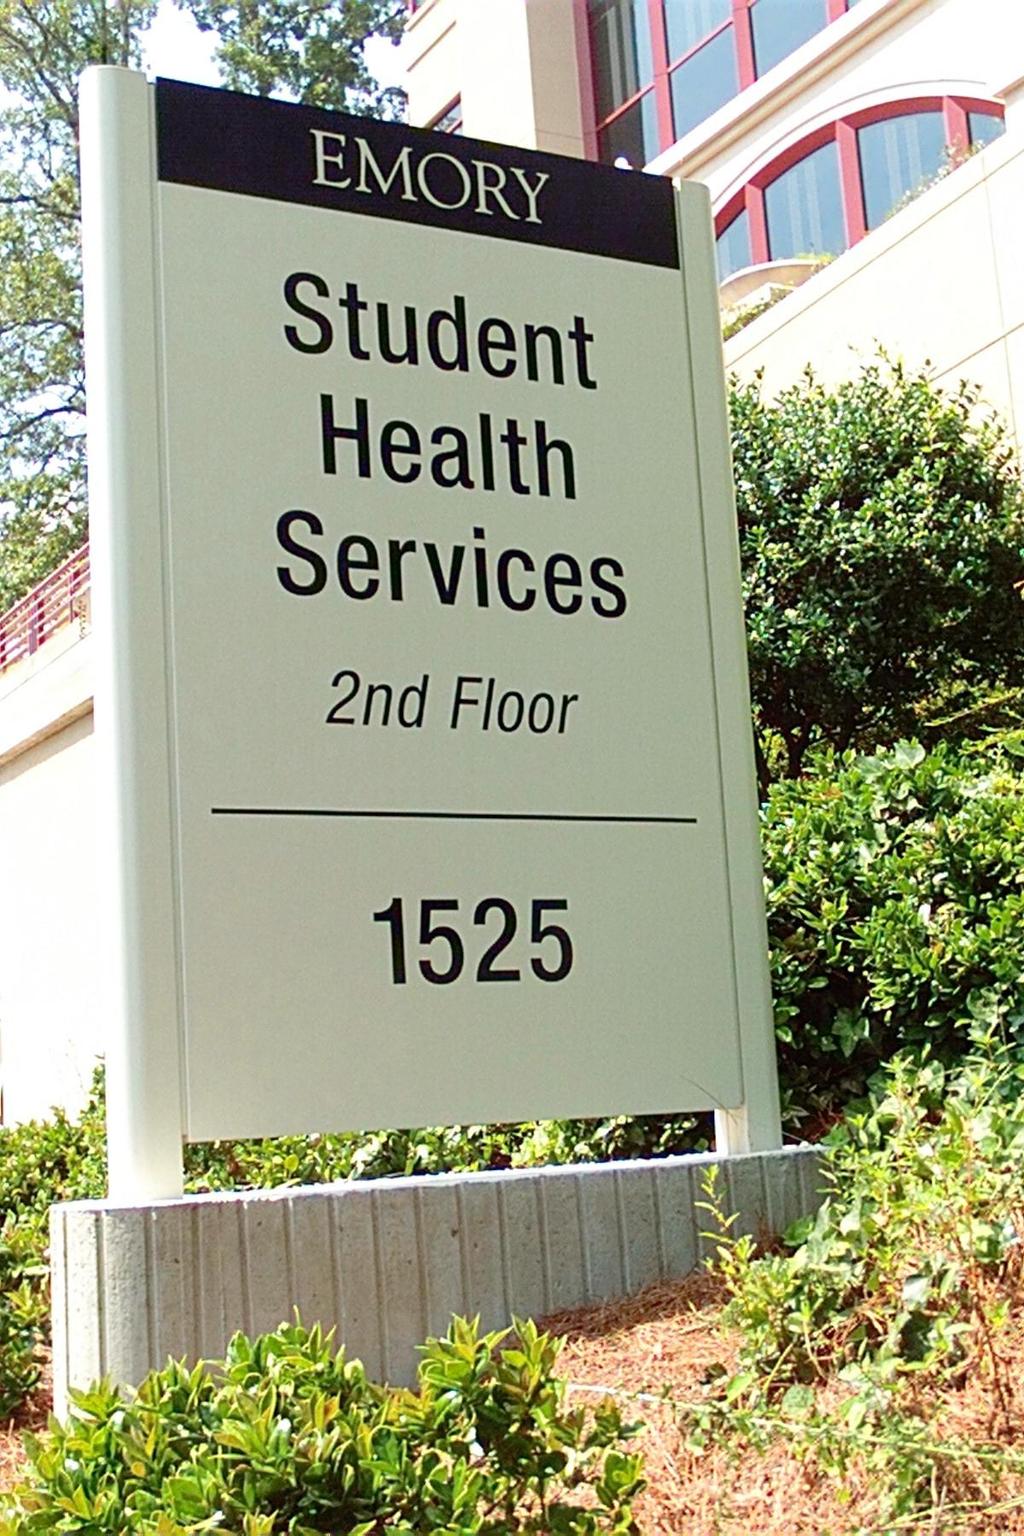 EMORY LOVES PARENTS! Greetings! The staff of Emory University Student Health Services (EUSHS) cares about the health and well being of your child/student.